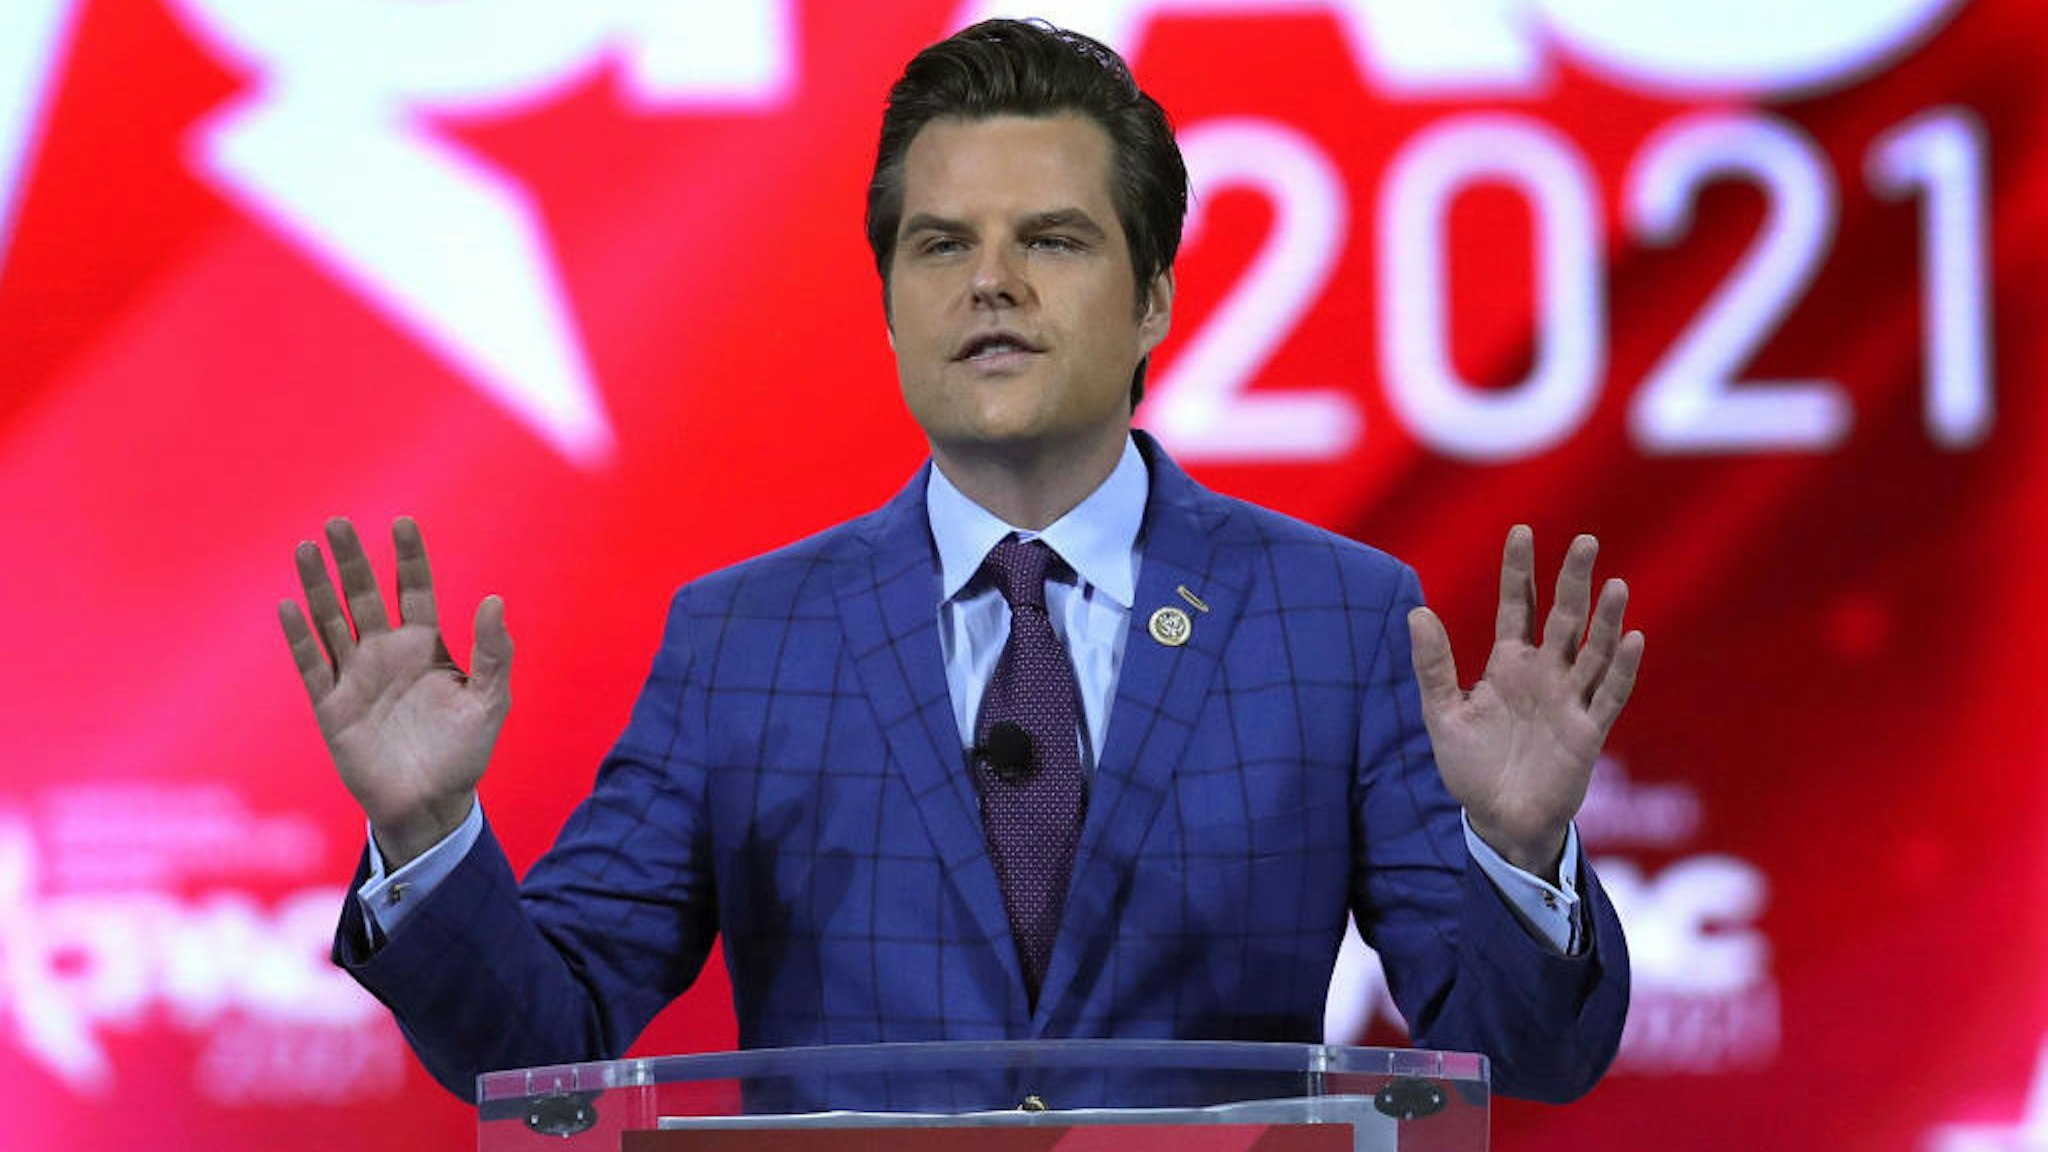 ORLANDO, FLORIDA - FEBRUARY 26: Rep. Matt Gaetz (R-FL) addresses the Conservative Political Action Conference being held in the Hyatt Regency on February 26, 2021 in Orlando, Florida. Begun in 1974, CPAC brings together conservative organizations, activists, and world leaders to discuss issues important to them. (Photo by Joe Raedle/Getty Images)